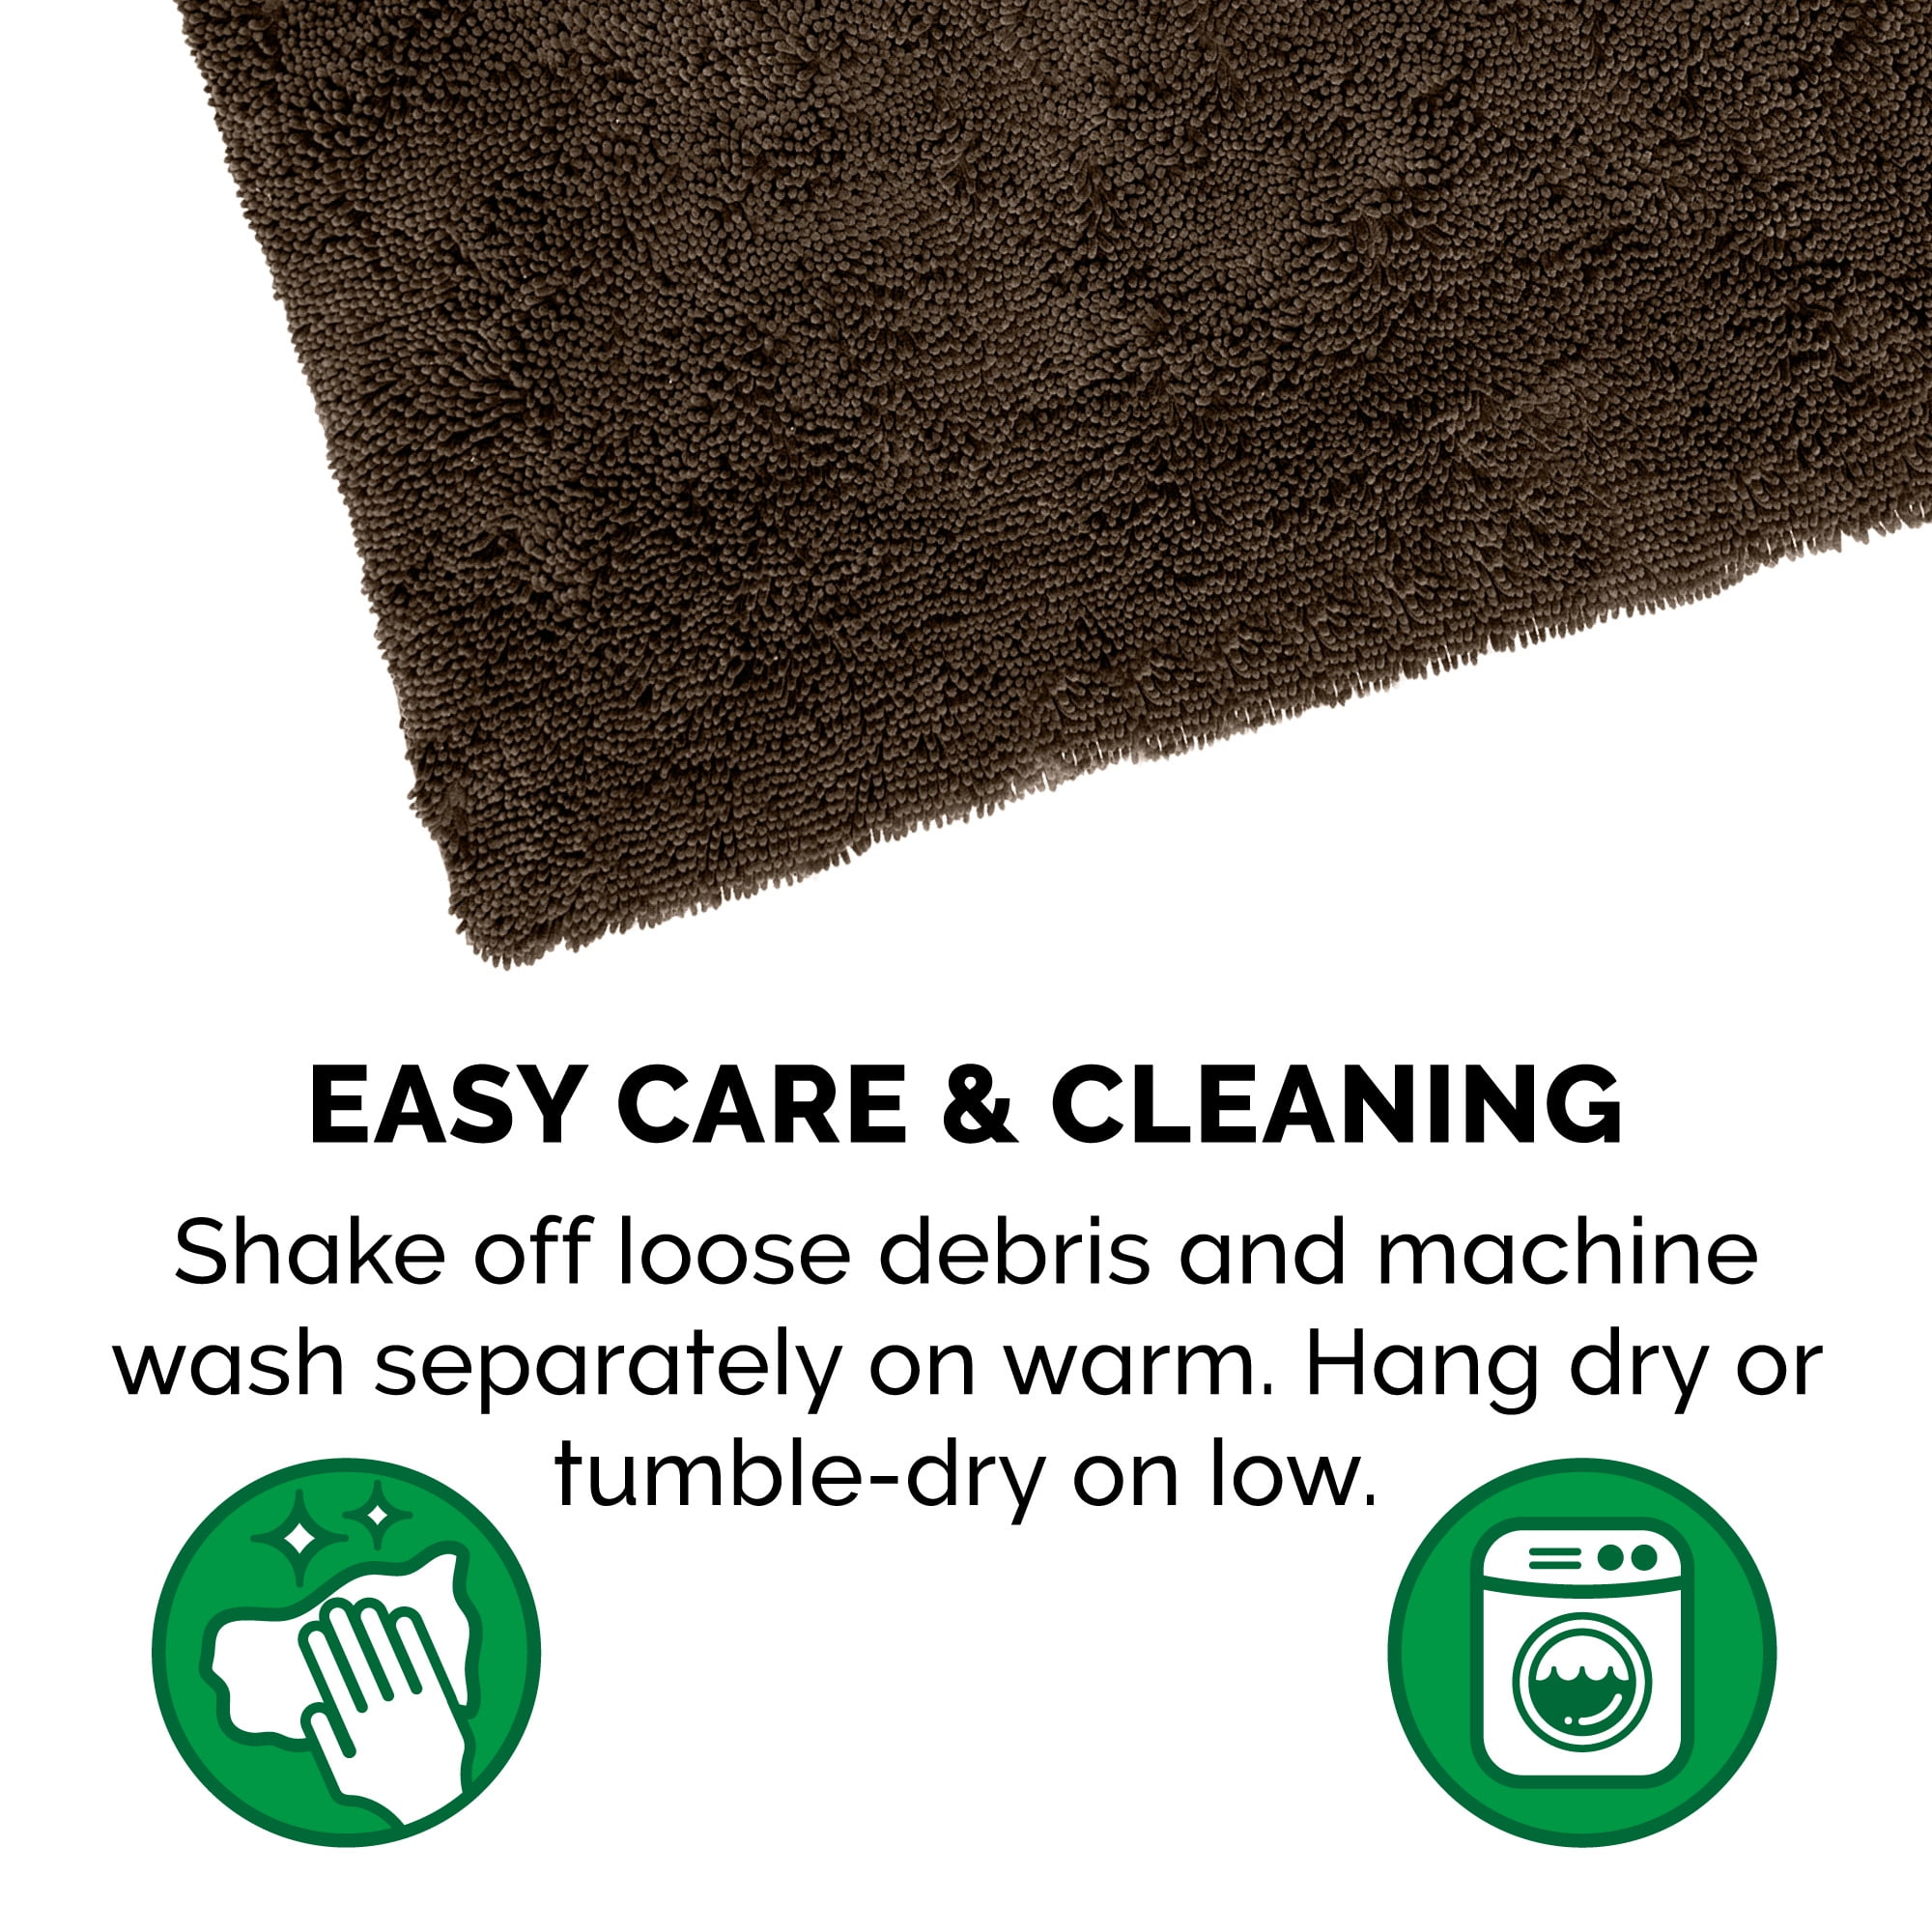 FurHaven Pet Products Muddy Paws Towel & Shammy Rug for Dogs & Cats - Mud,  Runner 